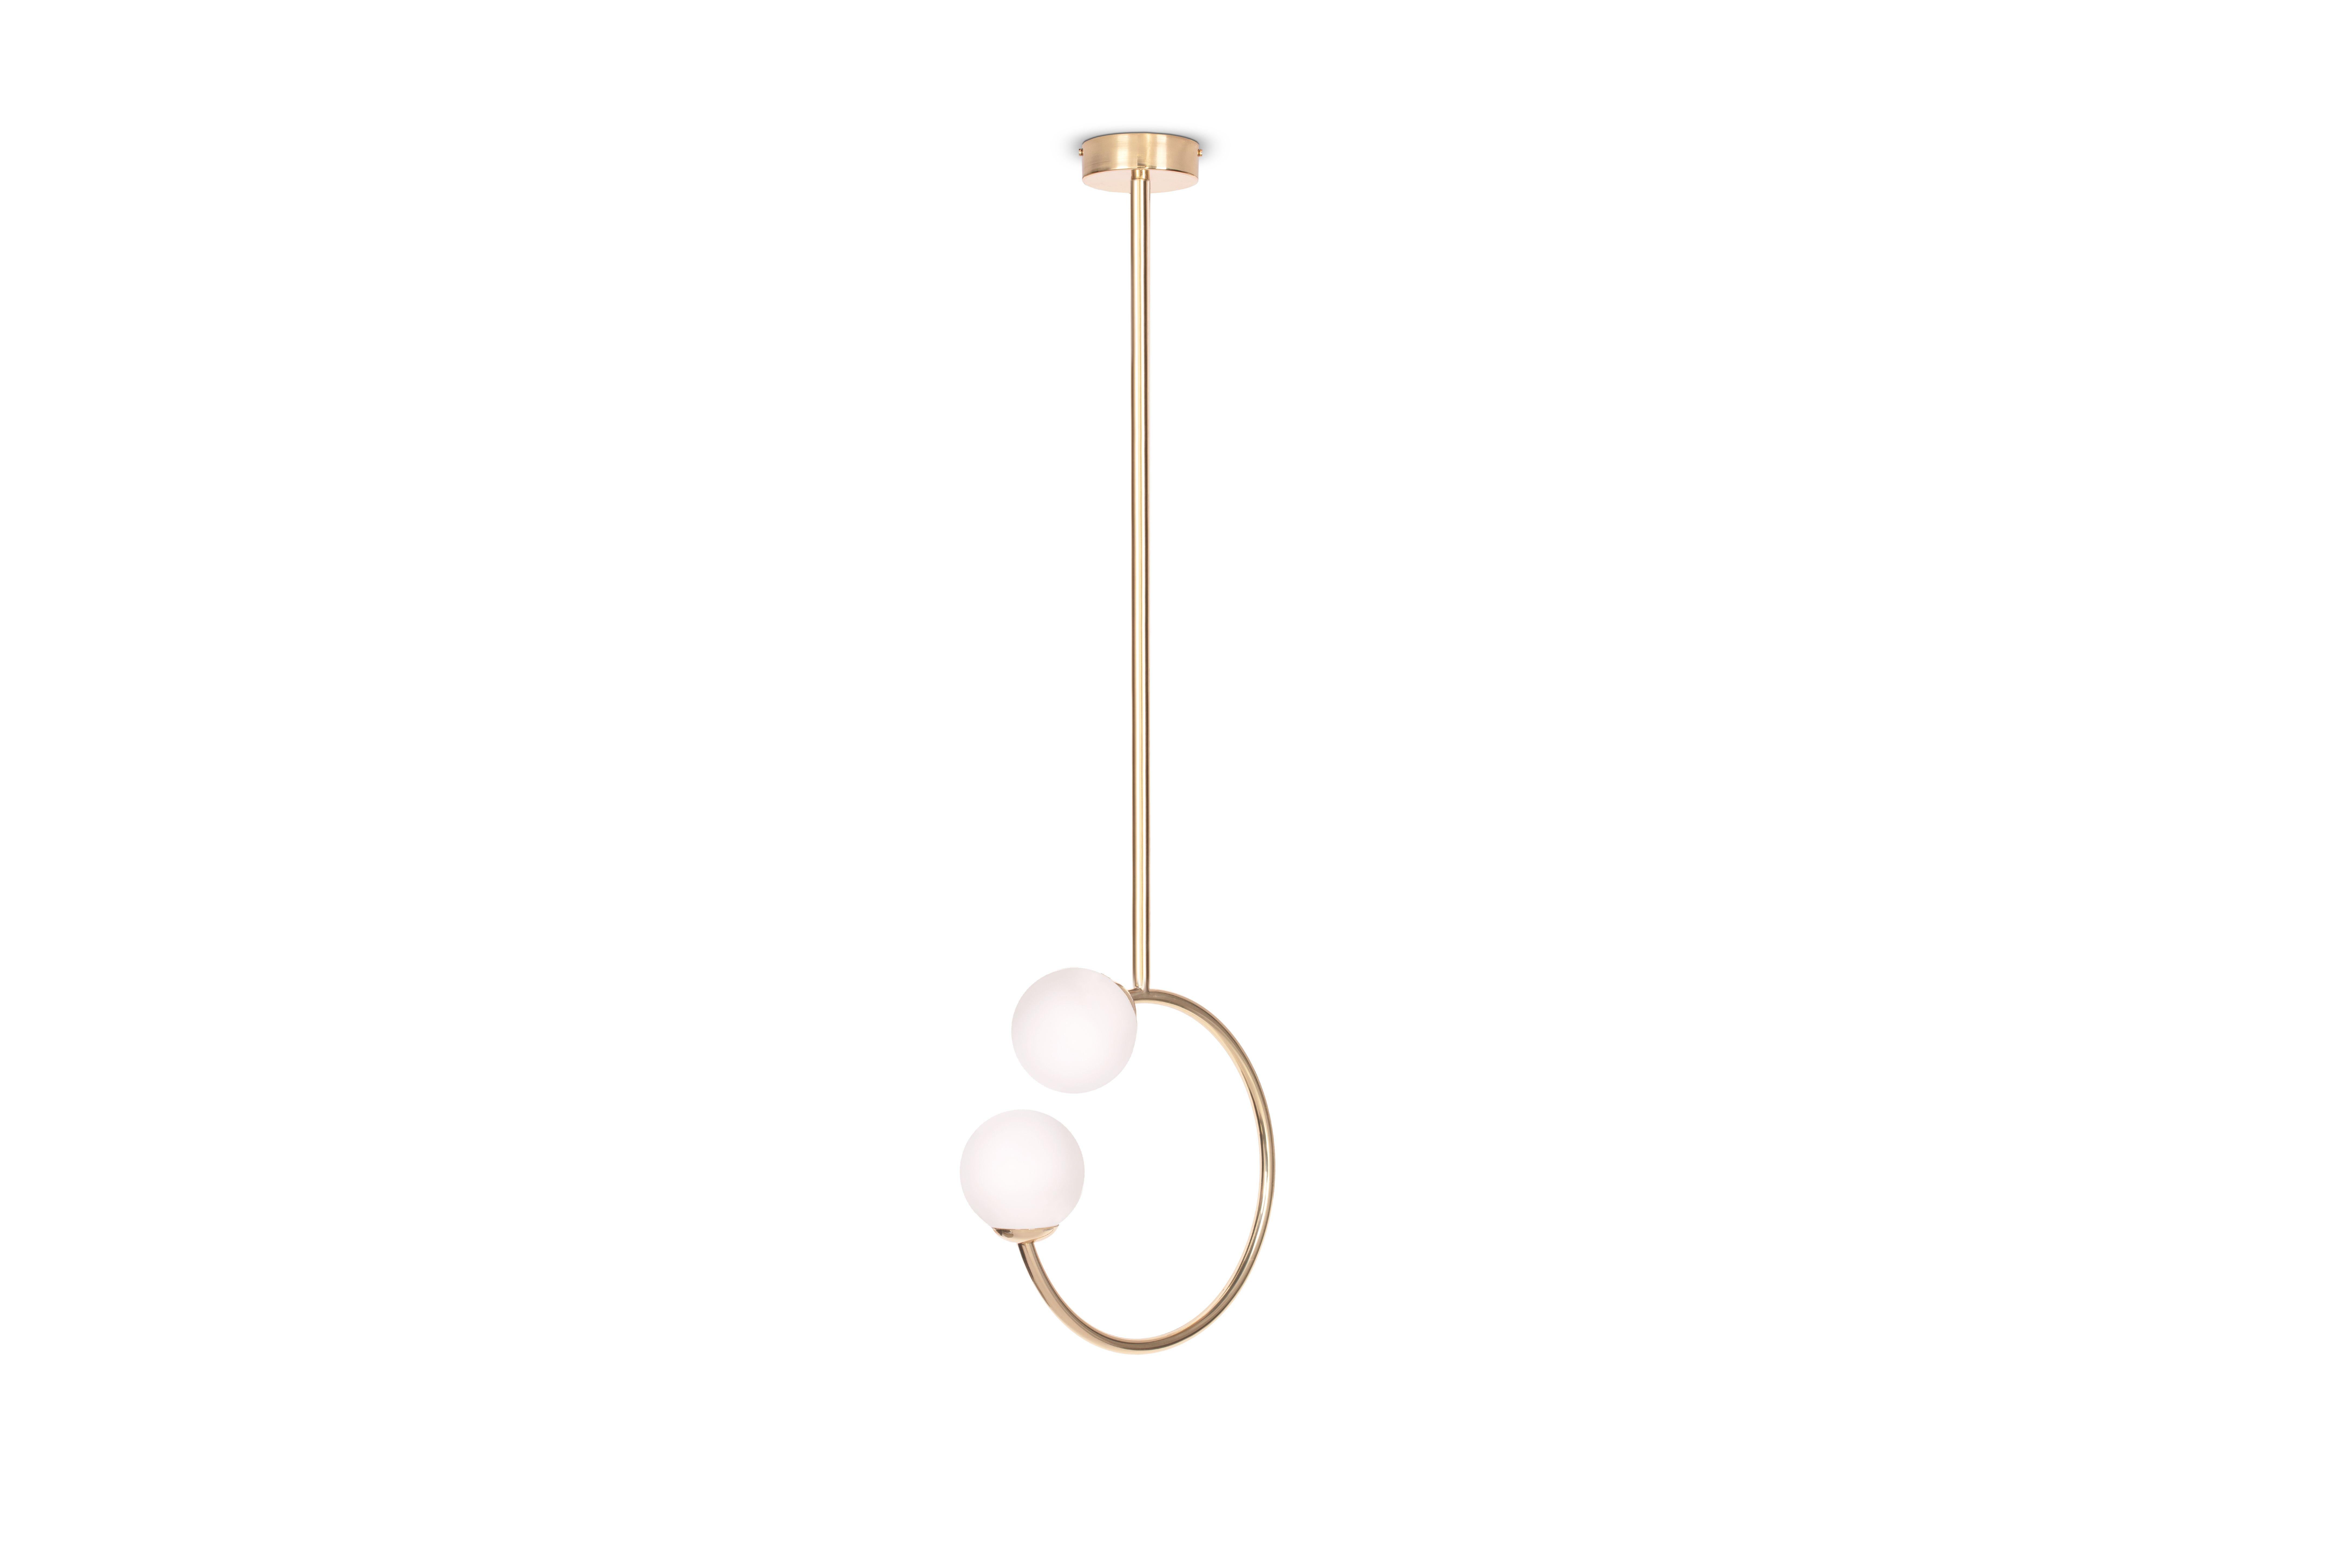 Gabriela brass ceiling lamp, Royal Stranger
Dimensions: W 36 x D 14 x H 114 cm
Materials: Body Polished brass. Glass balls Blown glass opal diffuser.


Inspired by the femininity and using bold and vibrant color schemes, this collection is